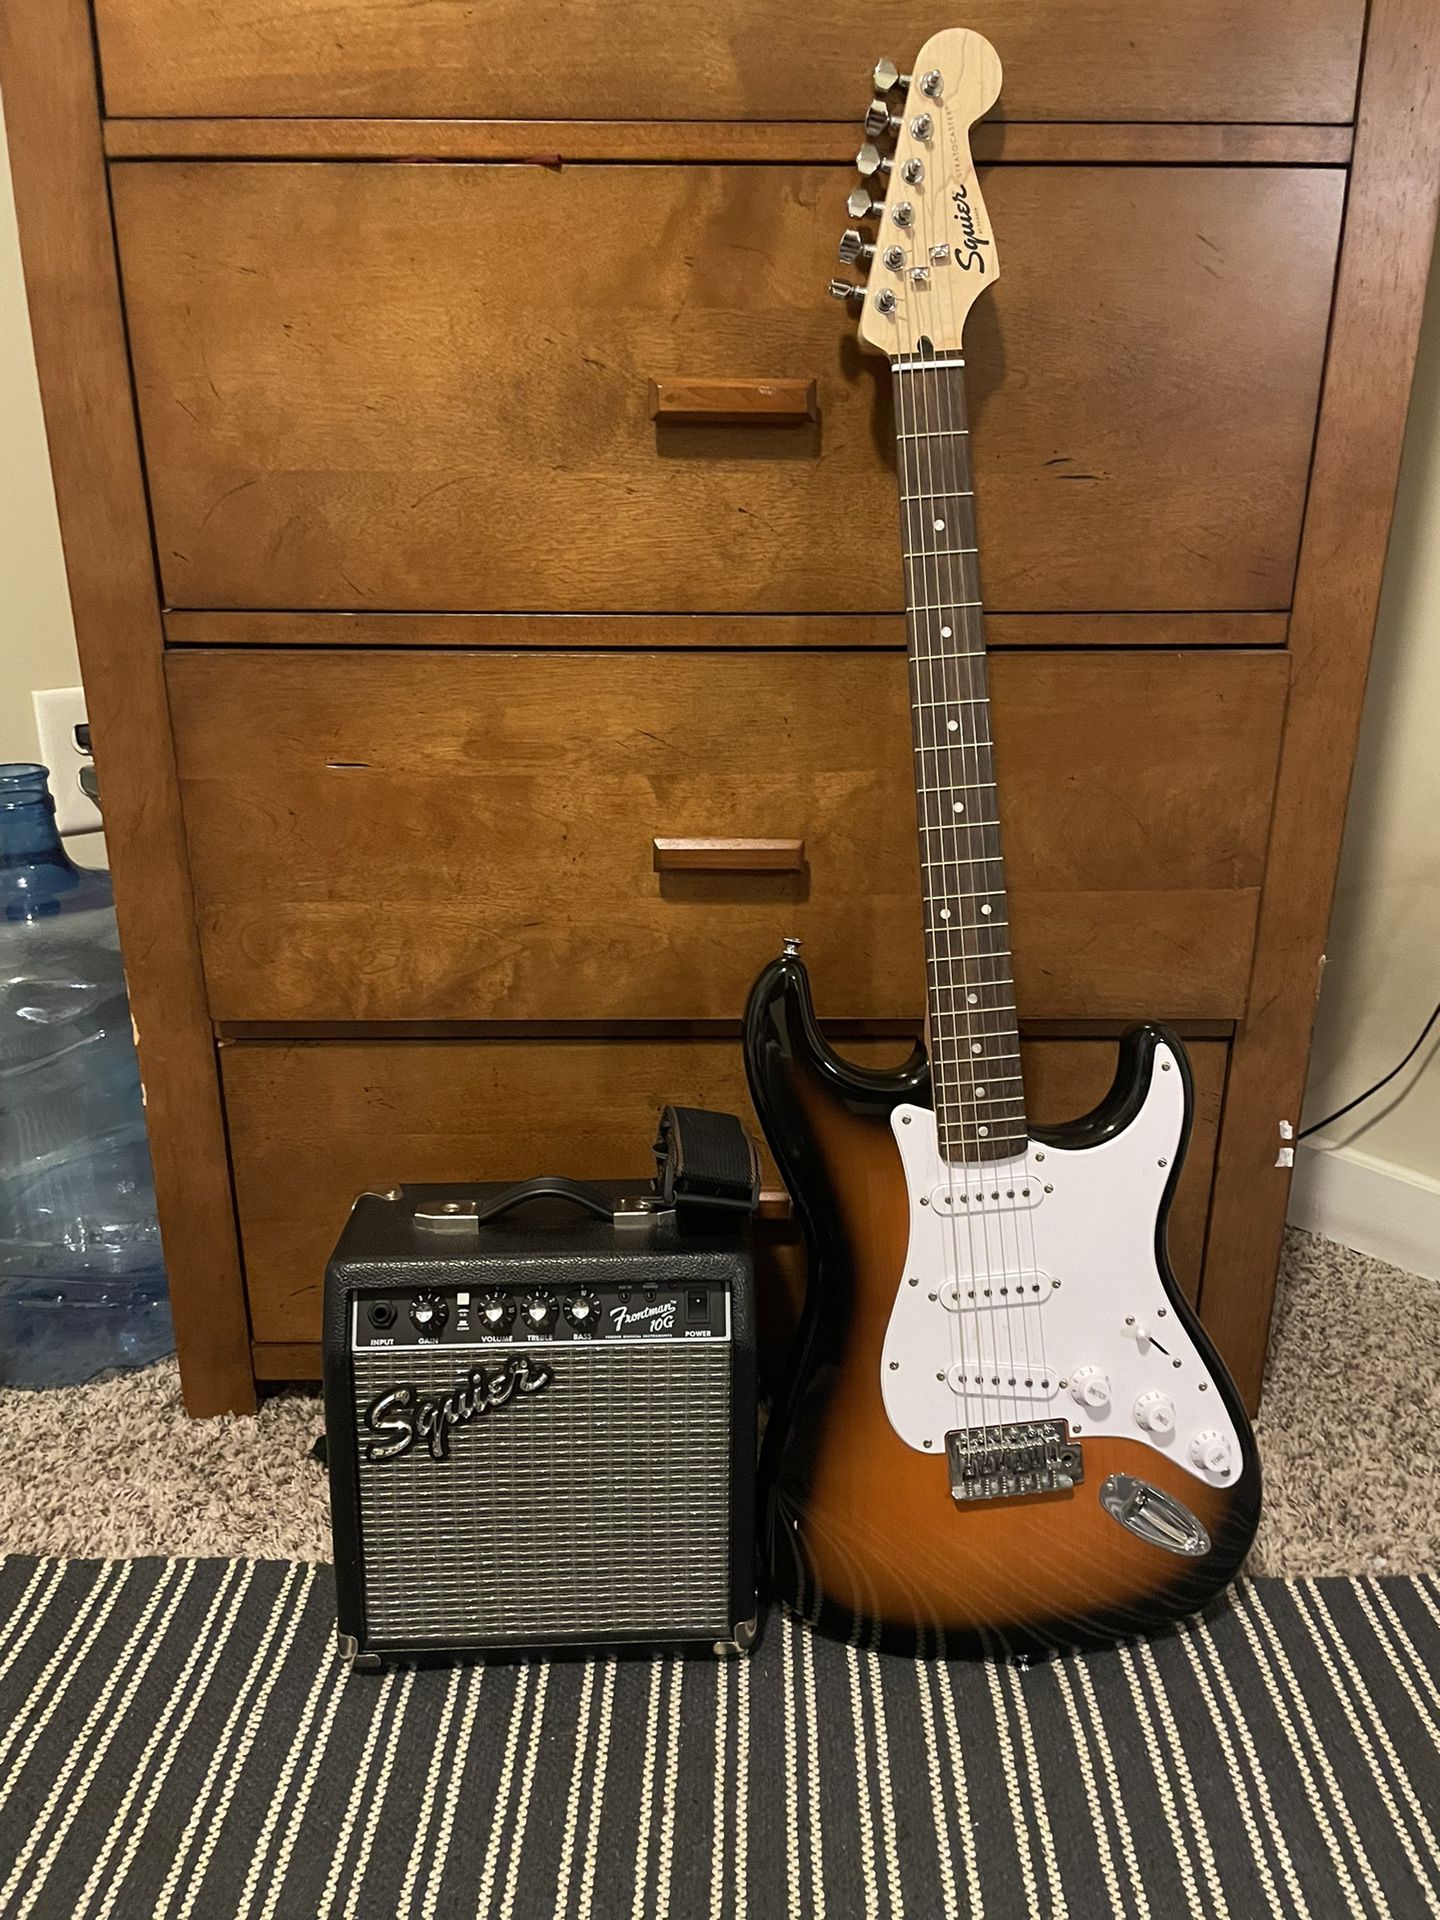 Squier Stratocaster Electric Guitar and Amp